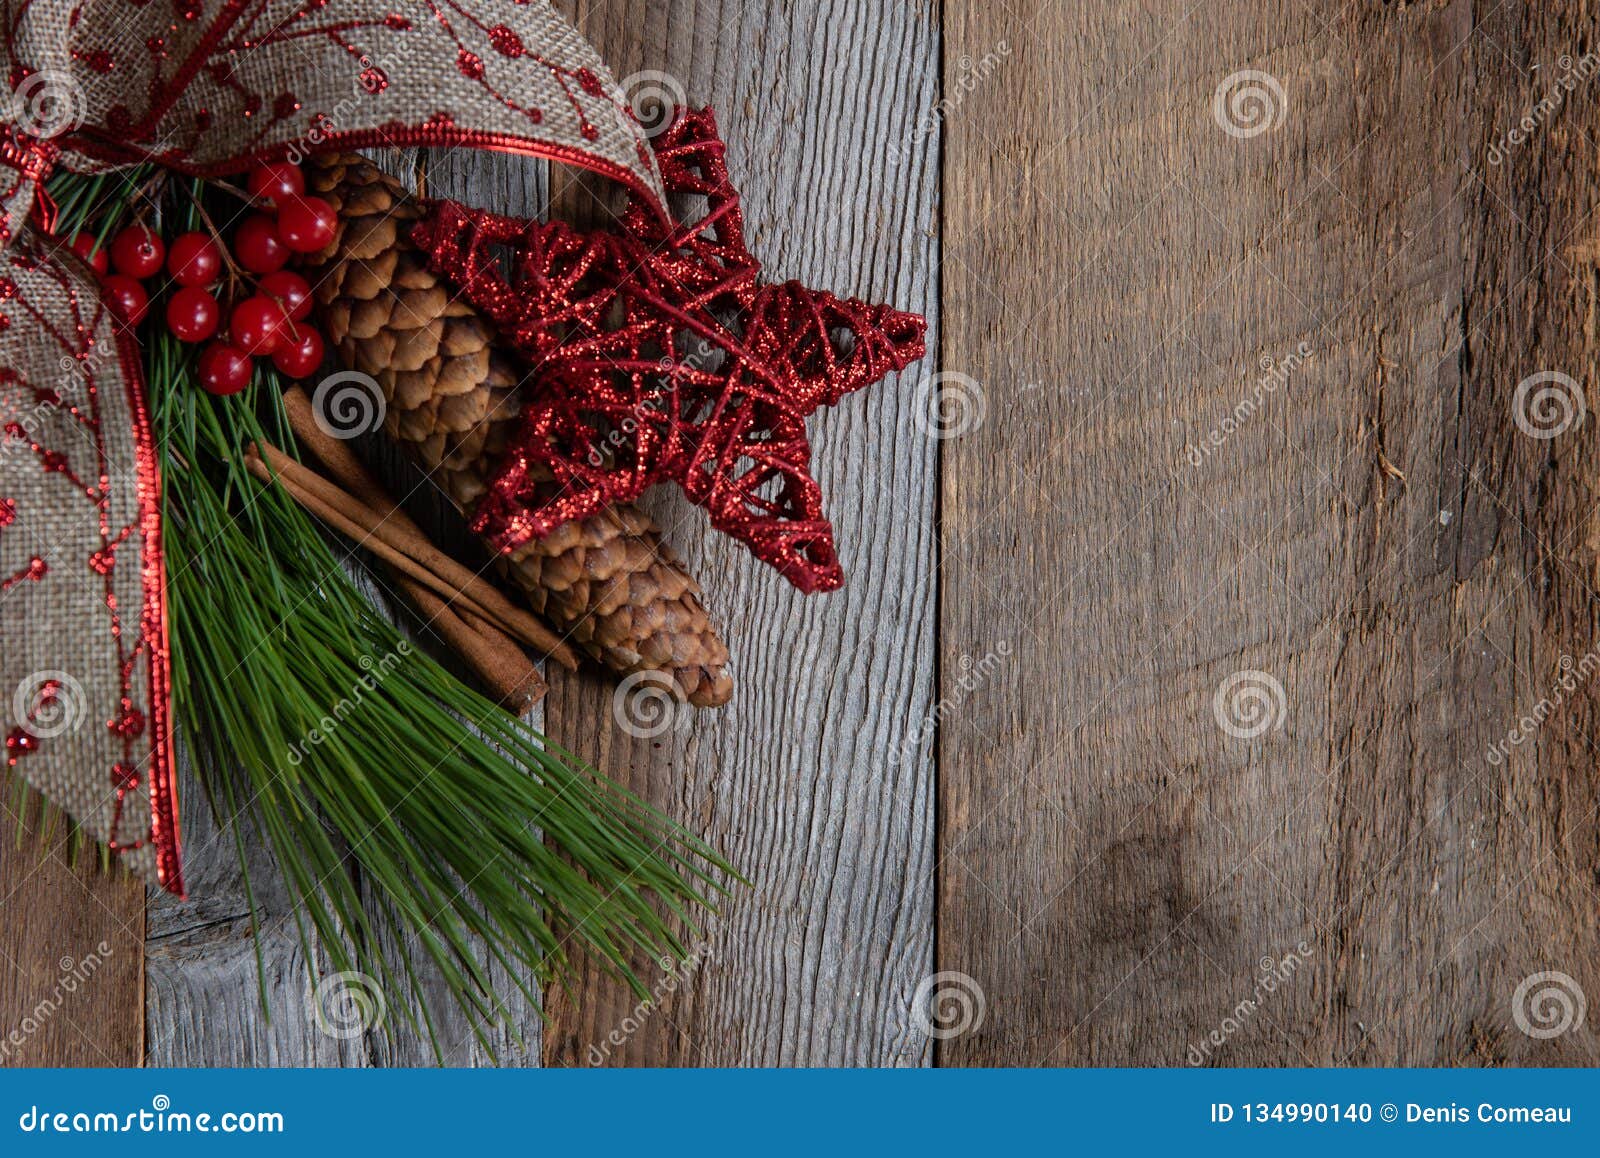 Authentic and Rustic Christmas Holiday Decorations on Weathered Wood ...